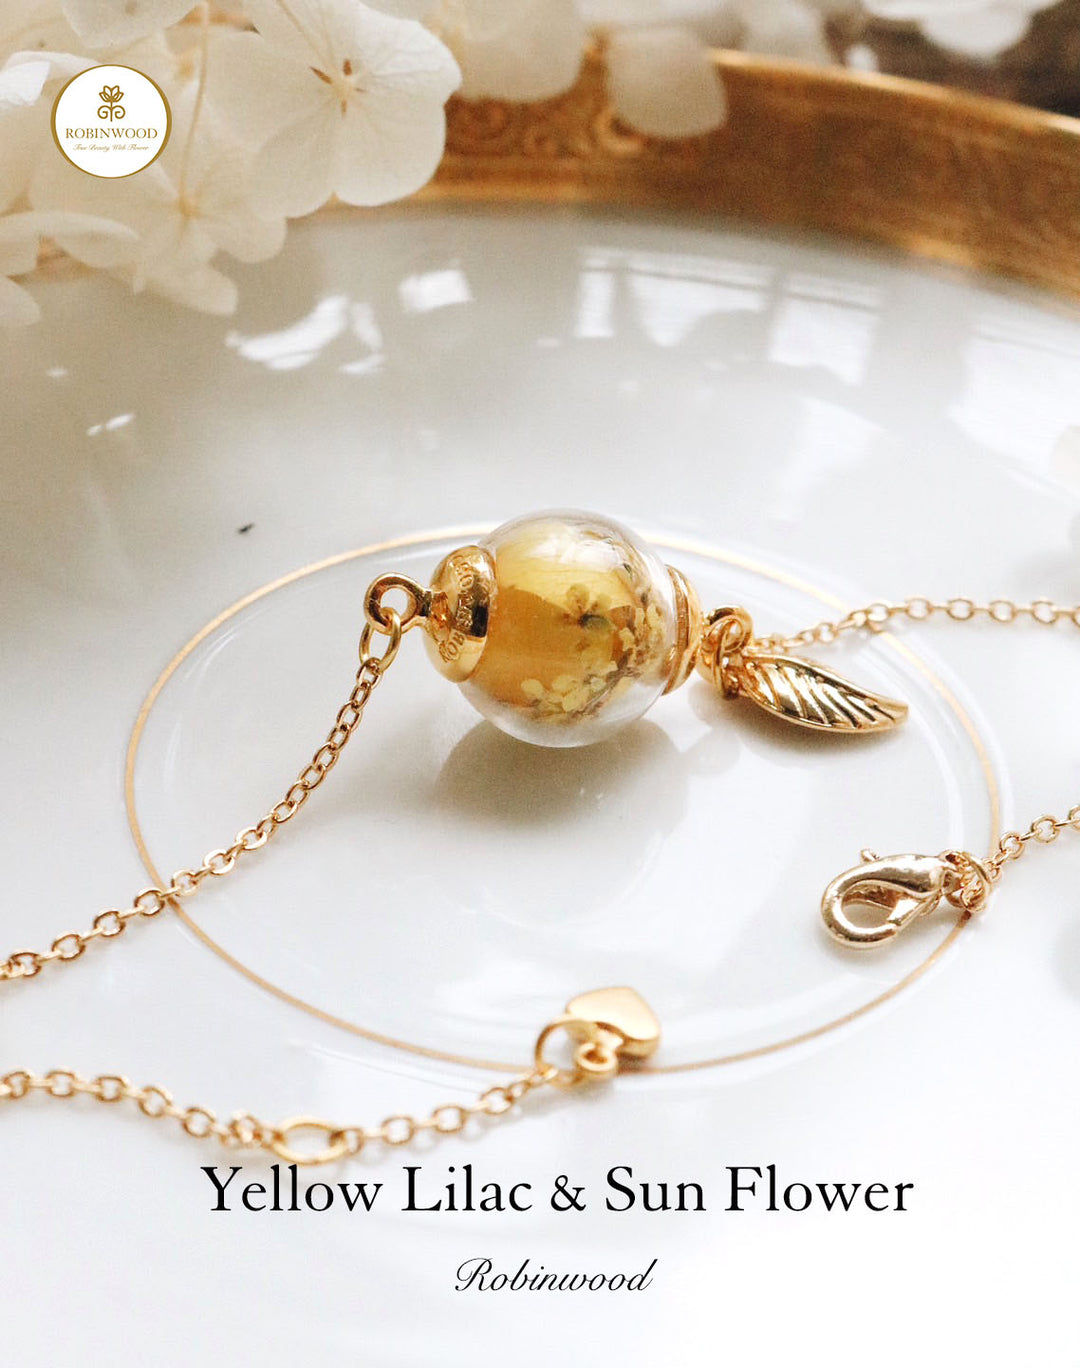 October Collection's " Yellow Lilac & Sun Flower " Design, 14K gold Solider Chain, Robinwood